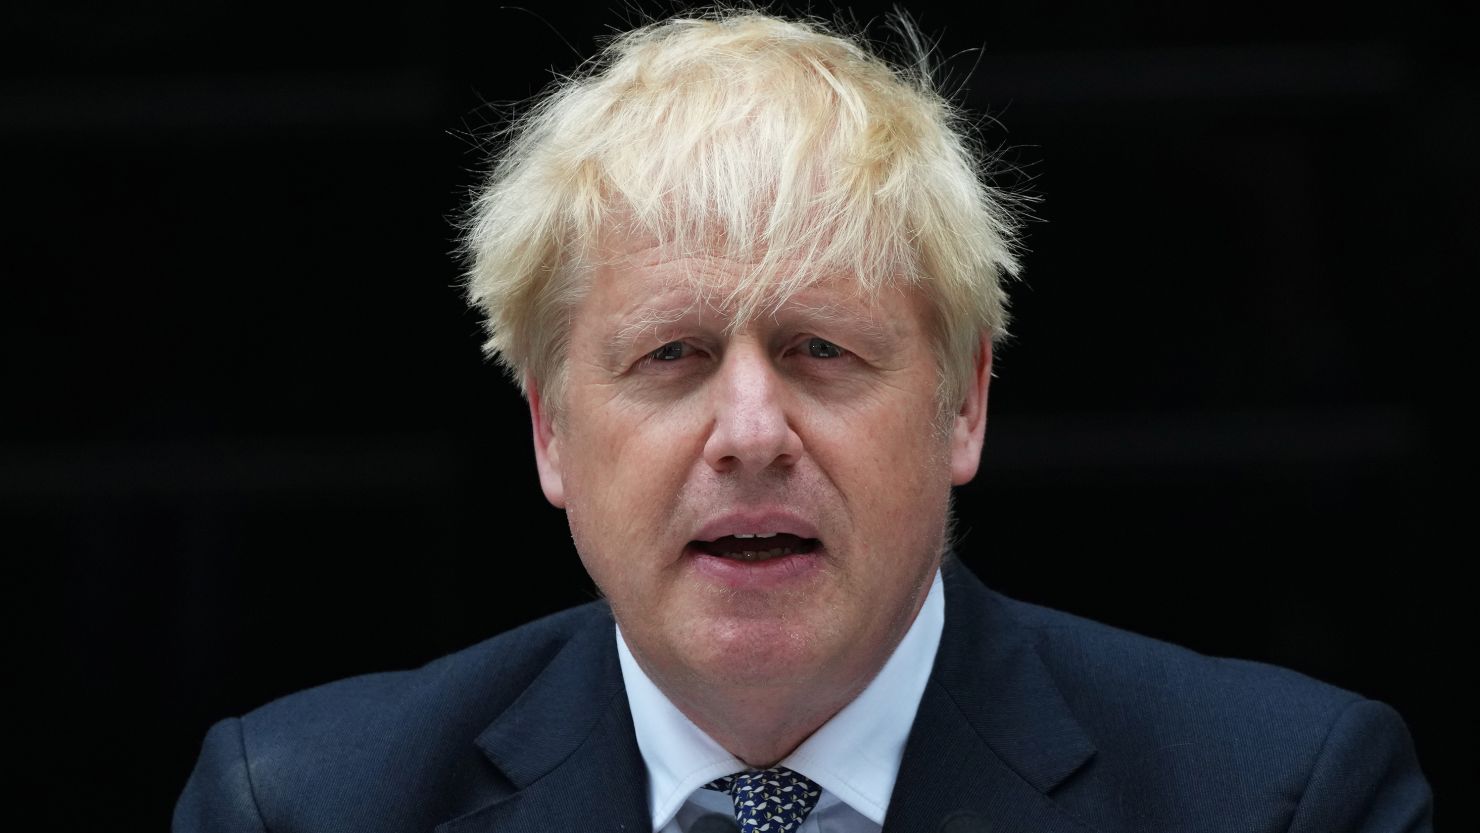 Boris Johnson said he was "bewildered and appalled."